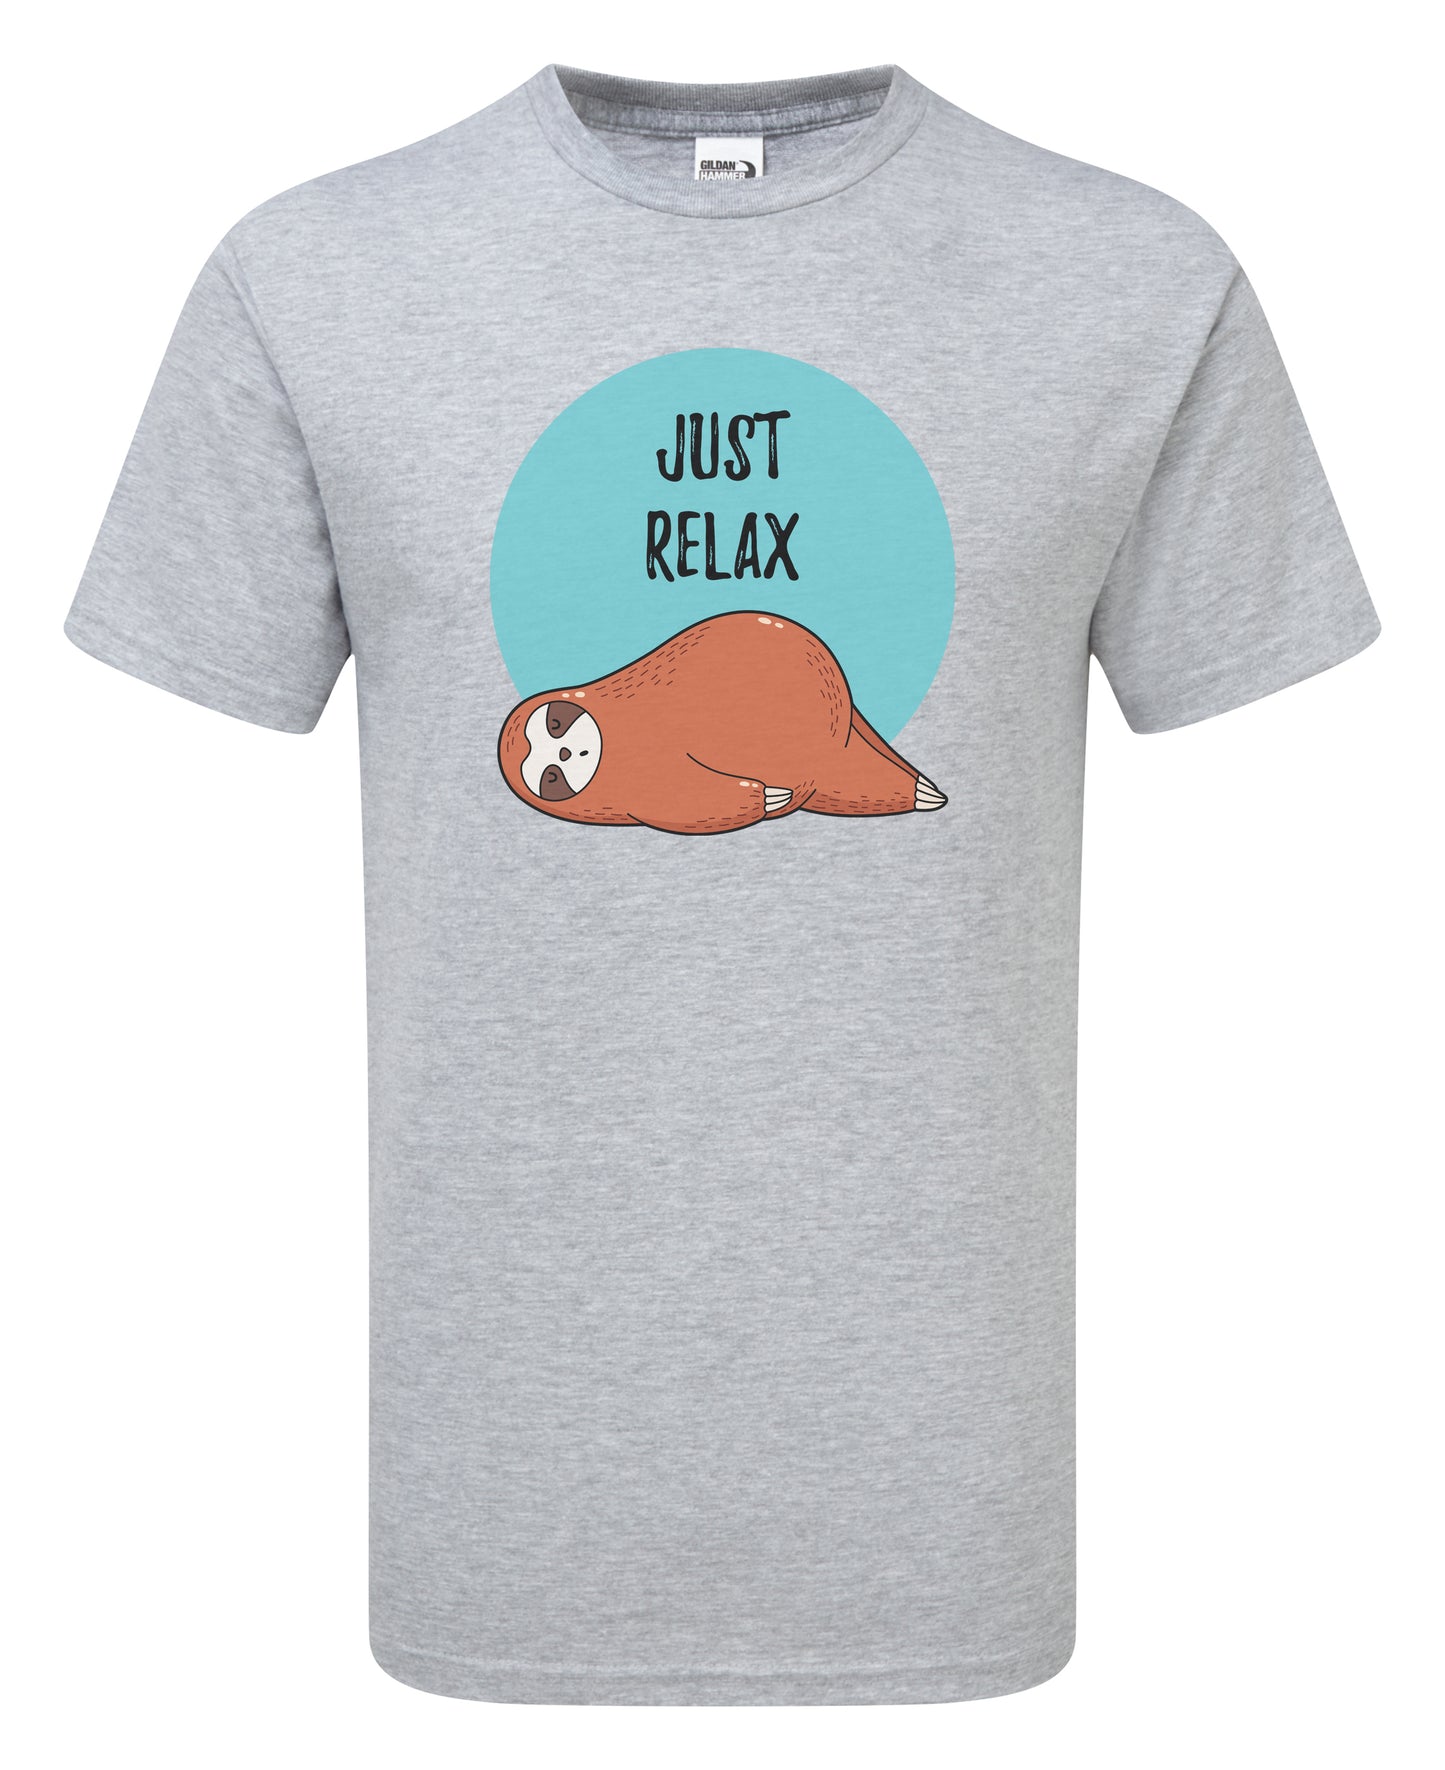 Sloth Just Relax T-Shirt